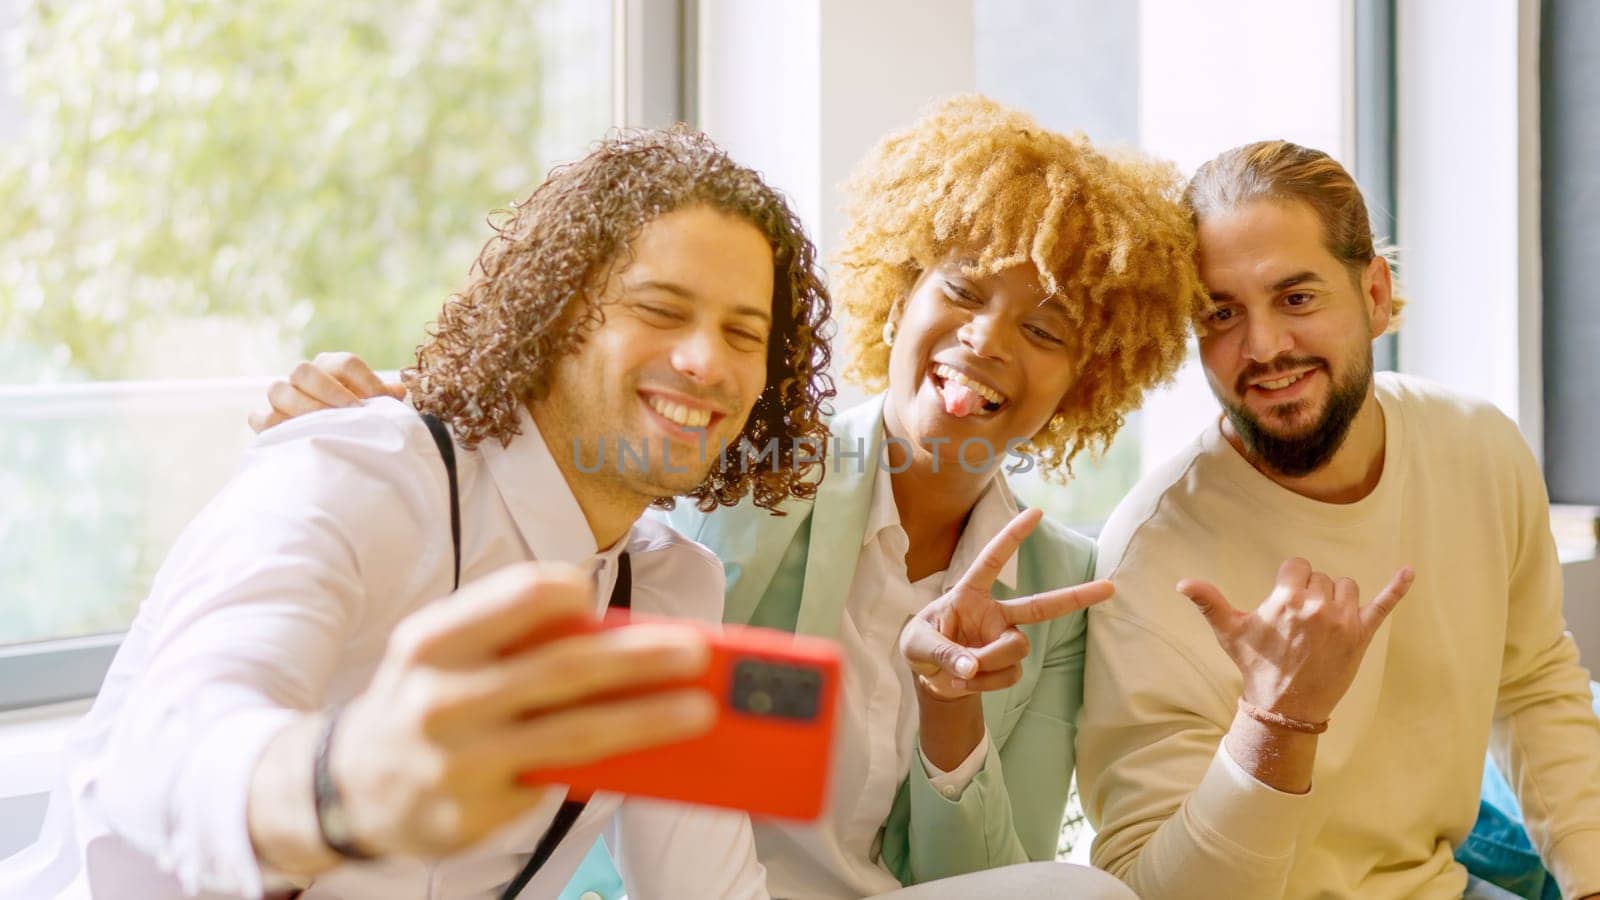 Multi-ethnic smiling coworkers taking a selfie during a work break